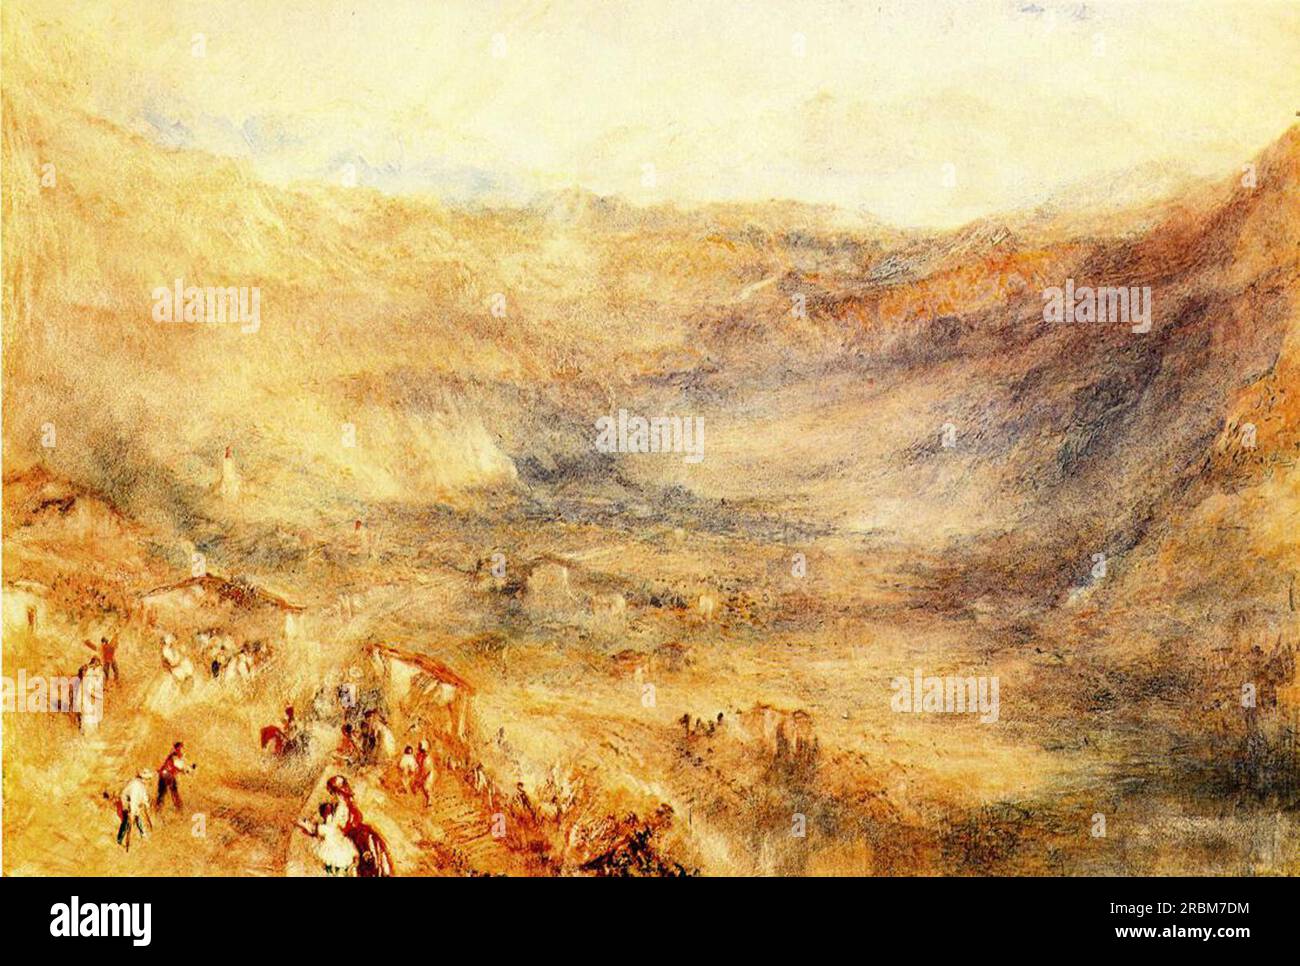 The Brunig Pass, from Meringen 1848 by J.M.W. Turner Stock Photo